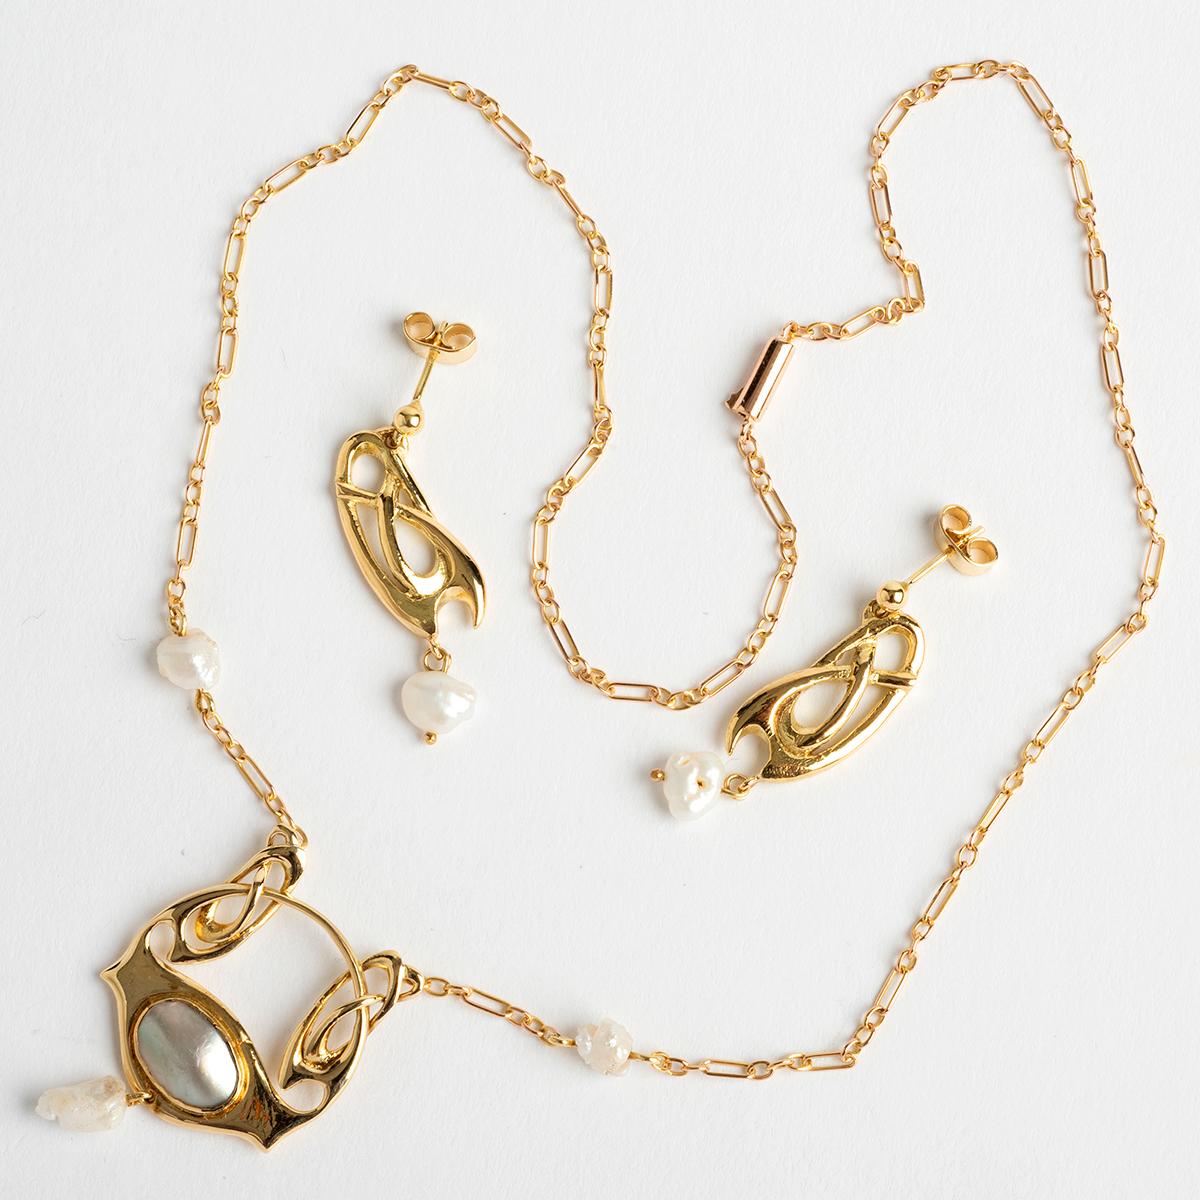 A unique piece within our carefully curated Vintage & Prestige fine jewellery collection, we are delighted to present the following:

Our rare and excellent vintage pearl necklace and earring matching set by Liberty of London come complete with